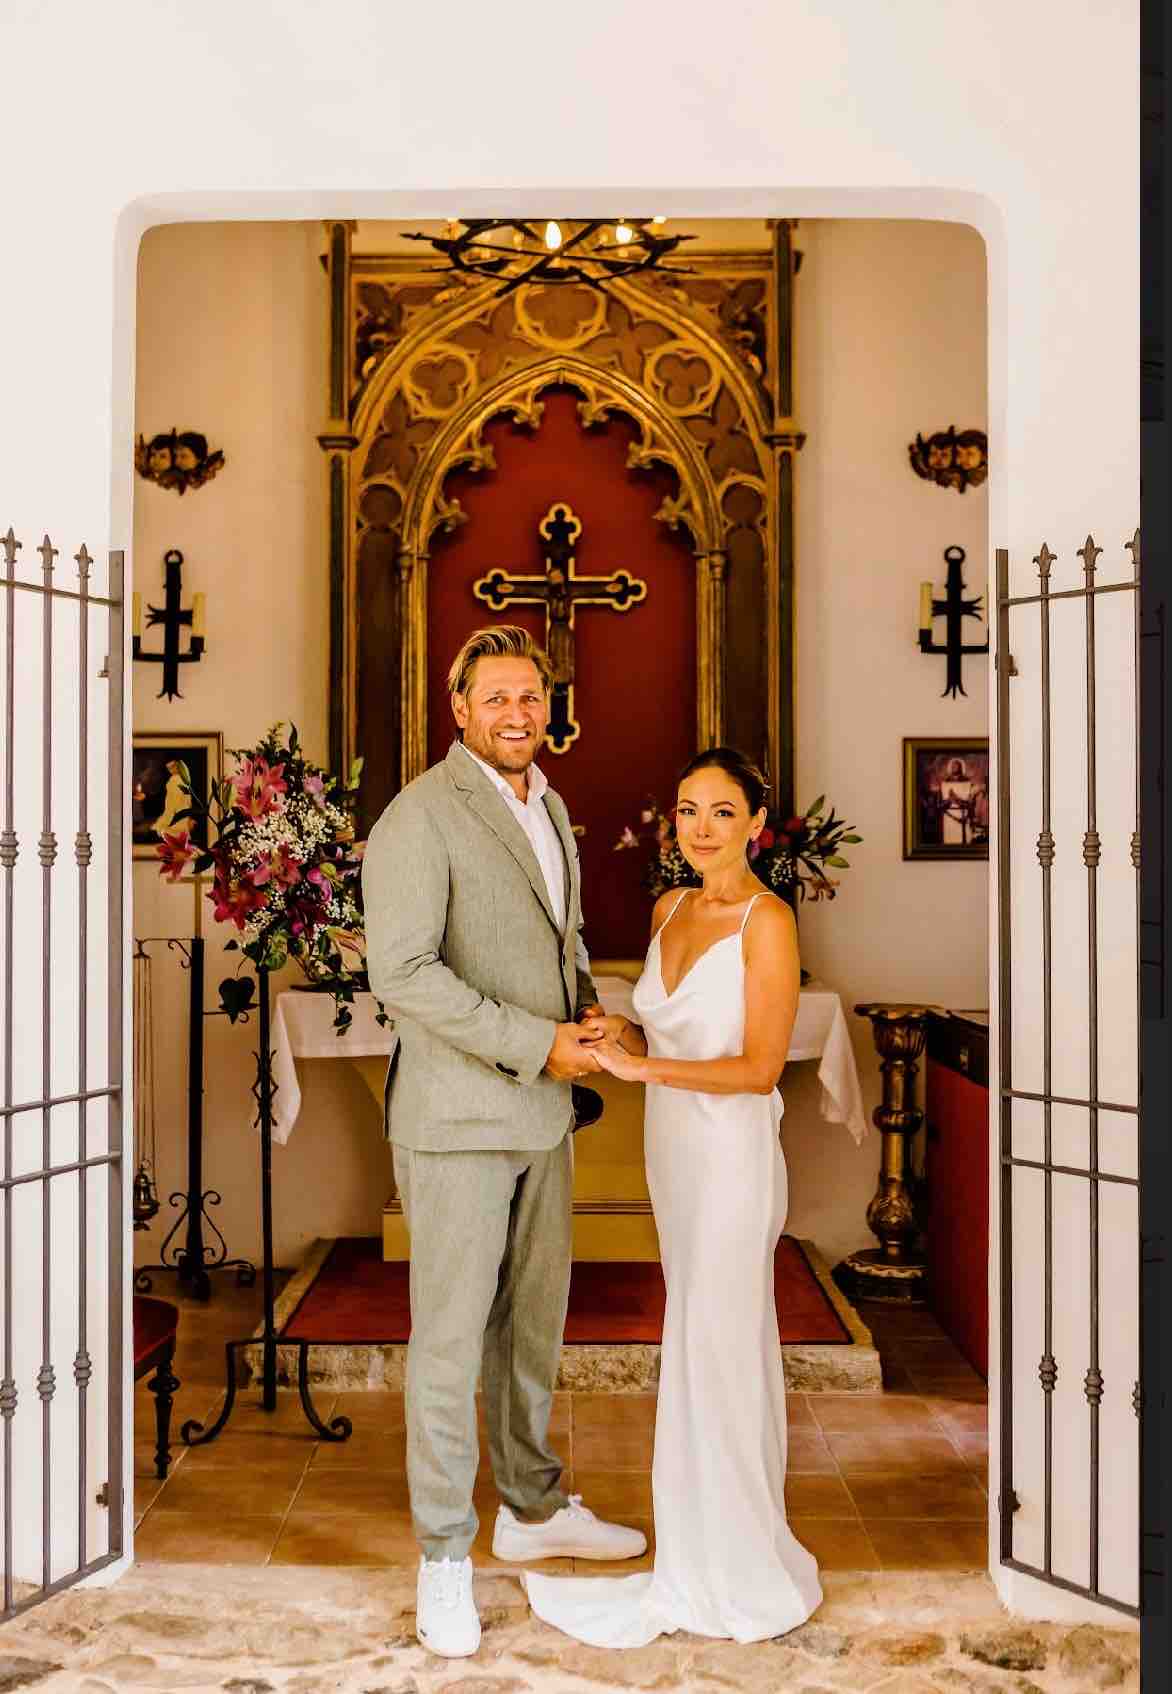 CURTIS STONE MARRIED AGAIN IN MAJORCA!